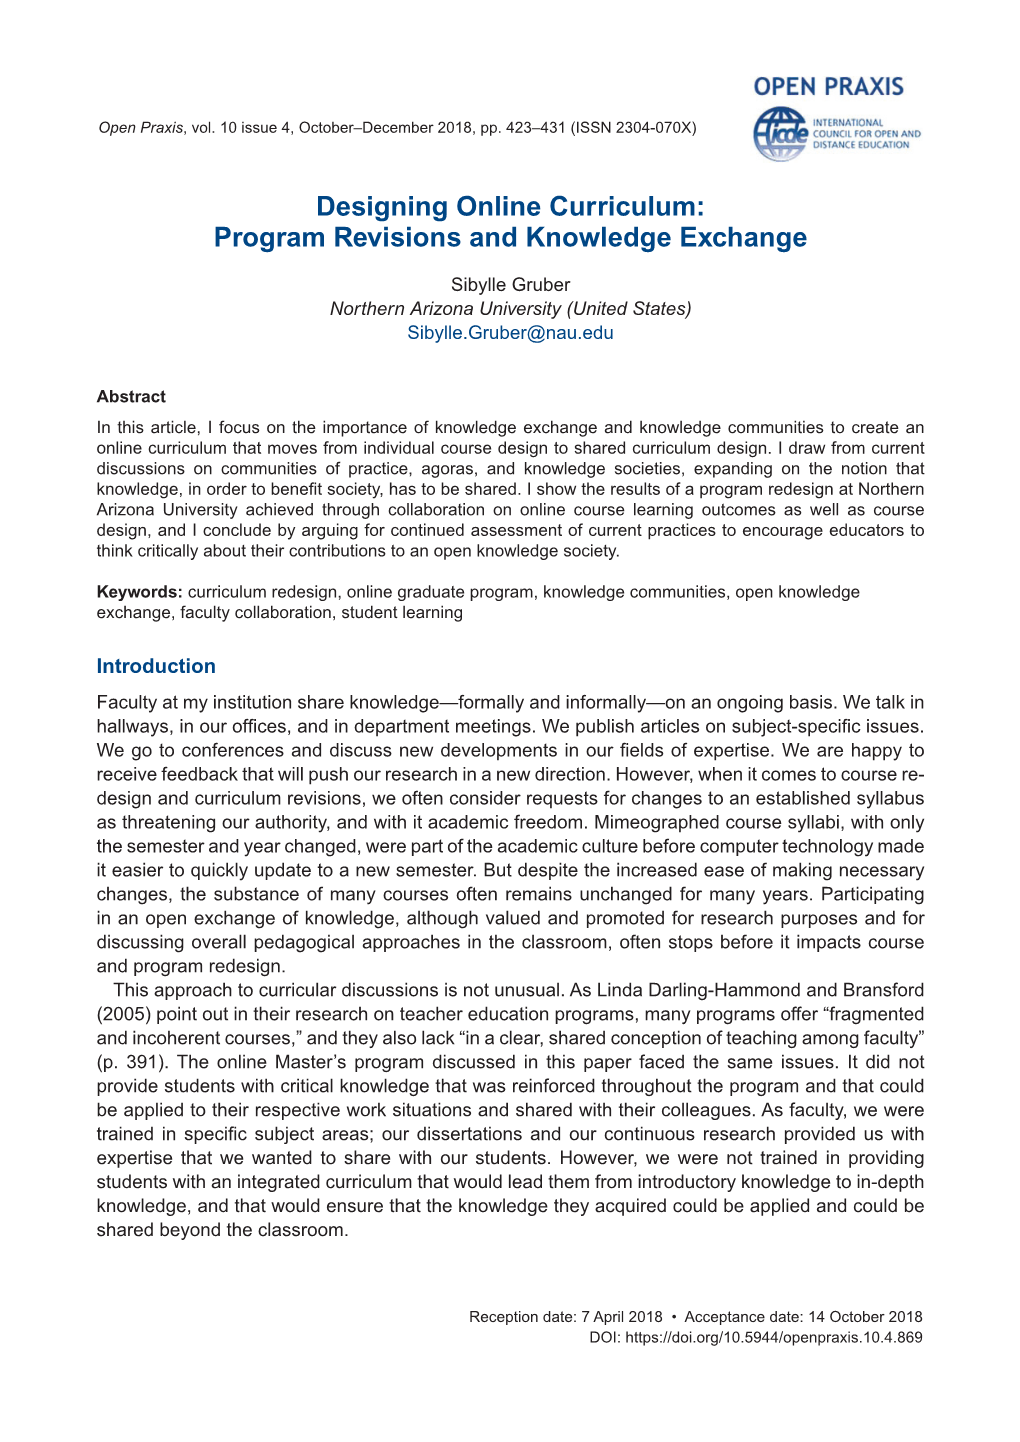 Program Revisions and Knowledge Exchange